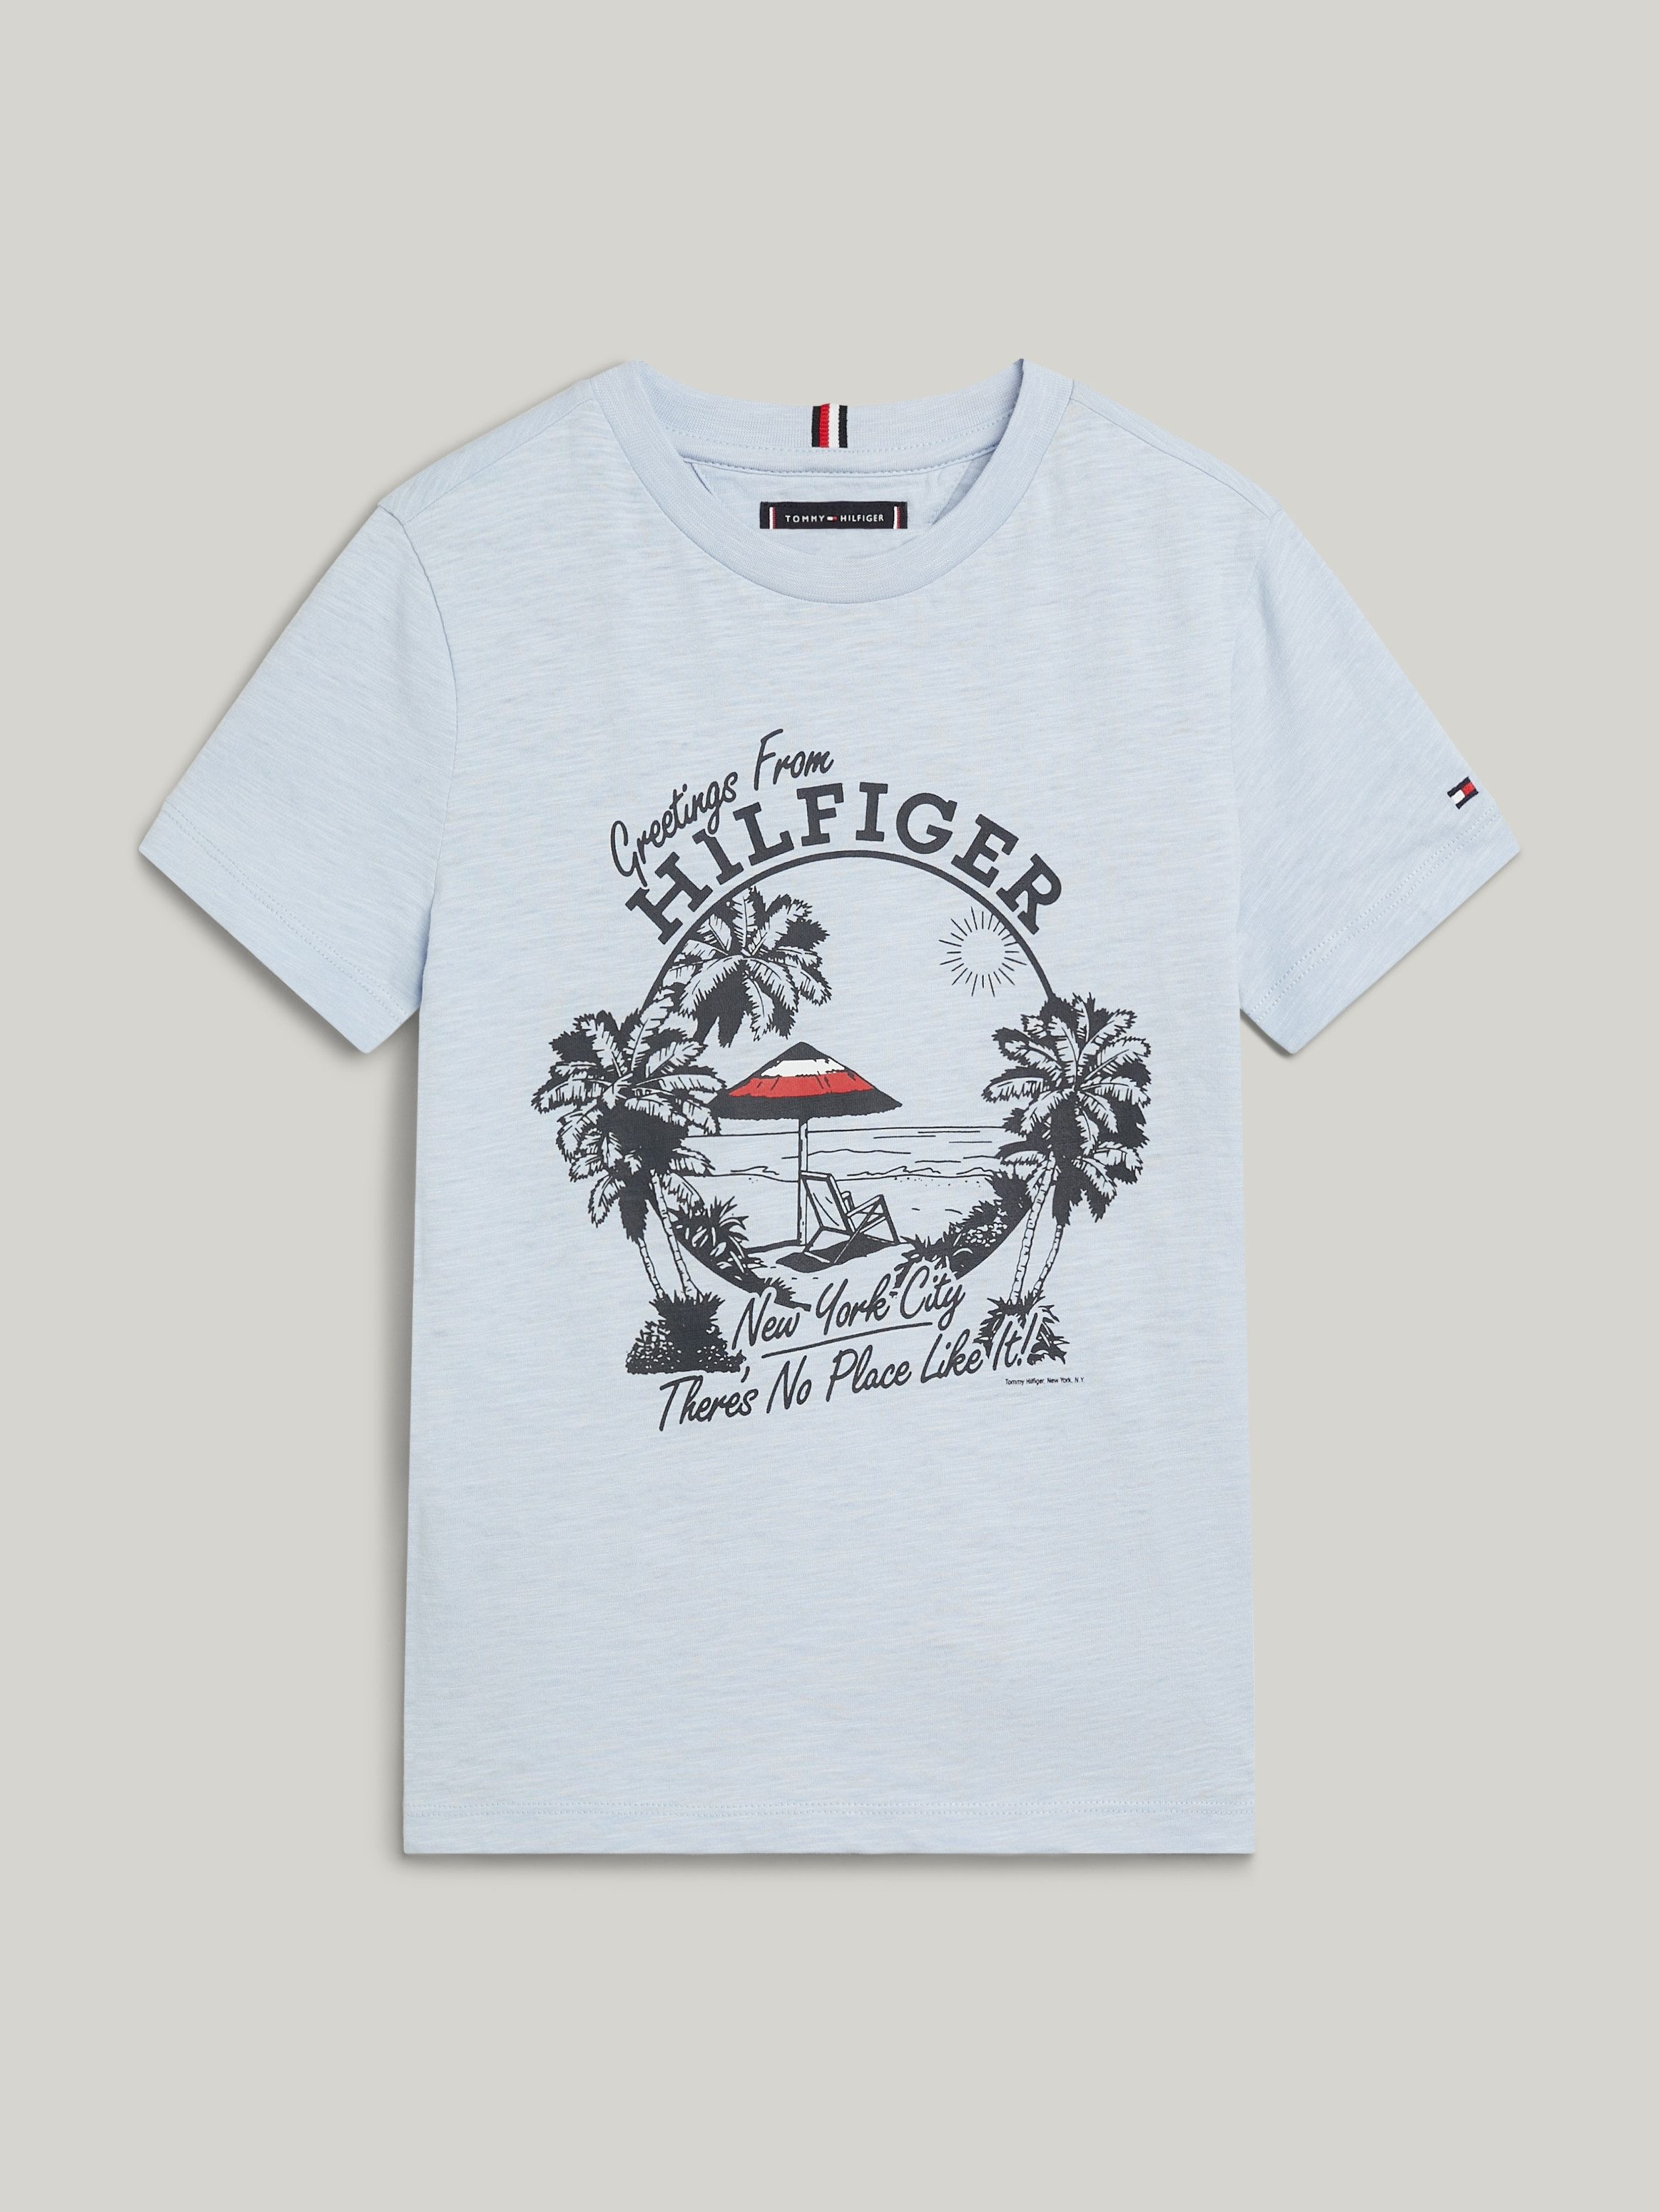 Tommy Hilfiger T-shirt GREETINGS FROM TEE S S